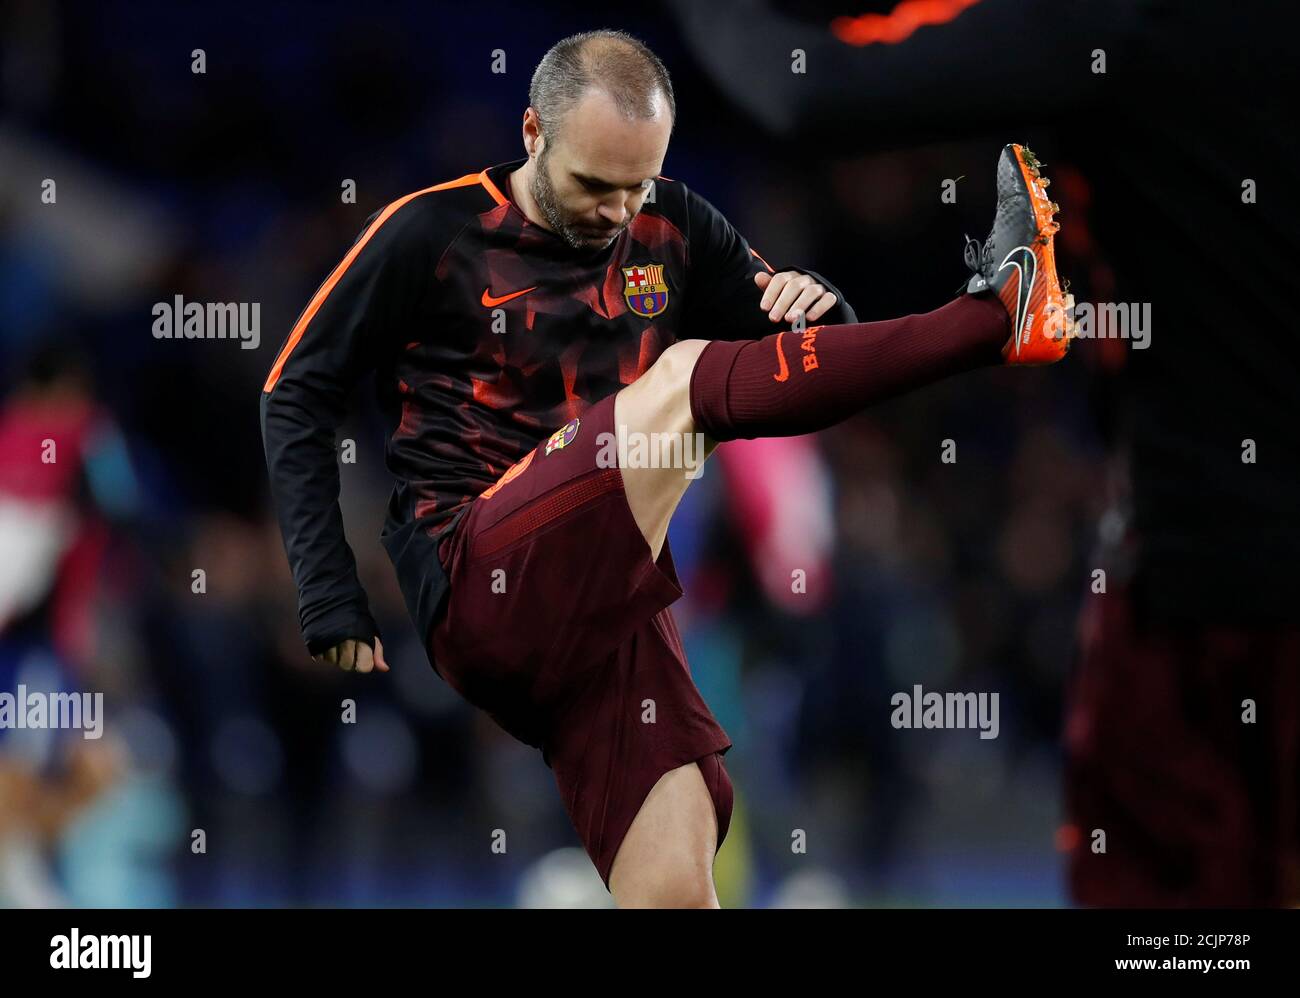 Soccer Football - Champions League Round of 16 First Leg - Chelsea vs FC Barcelona - Stamford Bridge, London, Britain - February 20, 2018   Barcelona’s Andres Iniesta warms up before the match    REUTERS/Eddie Keogh Stock Photo